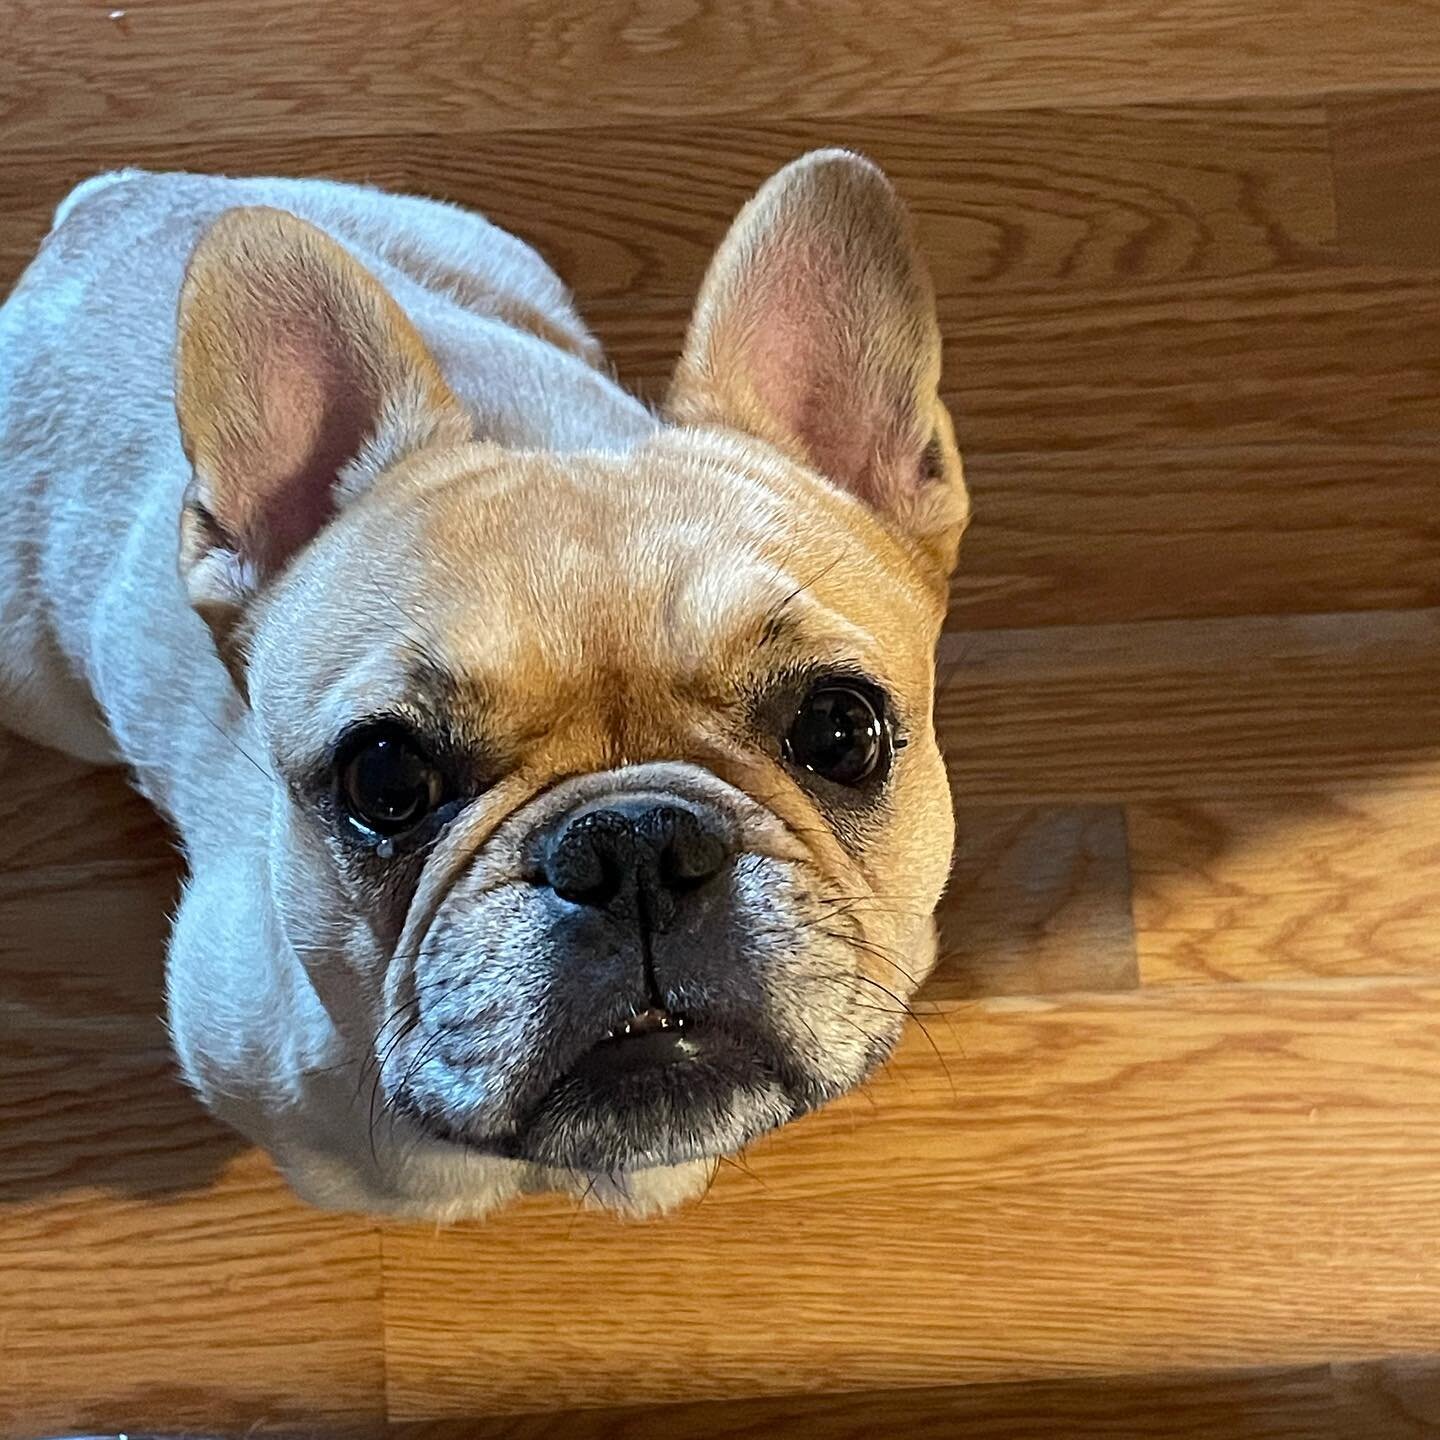 My begging face. Works almost every time! Happy Friday! #mood #dogbegging #cookiemonster #frenchie #frenchbulldog #frenchiesofinstagram #lovefrenchies #lovedogs #dog